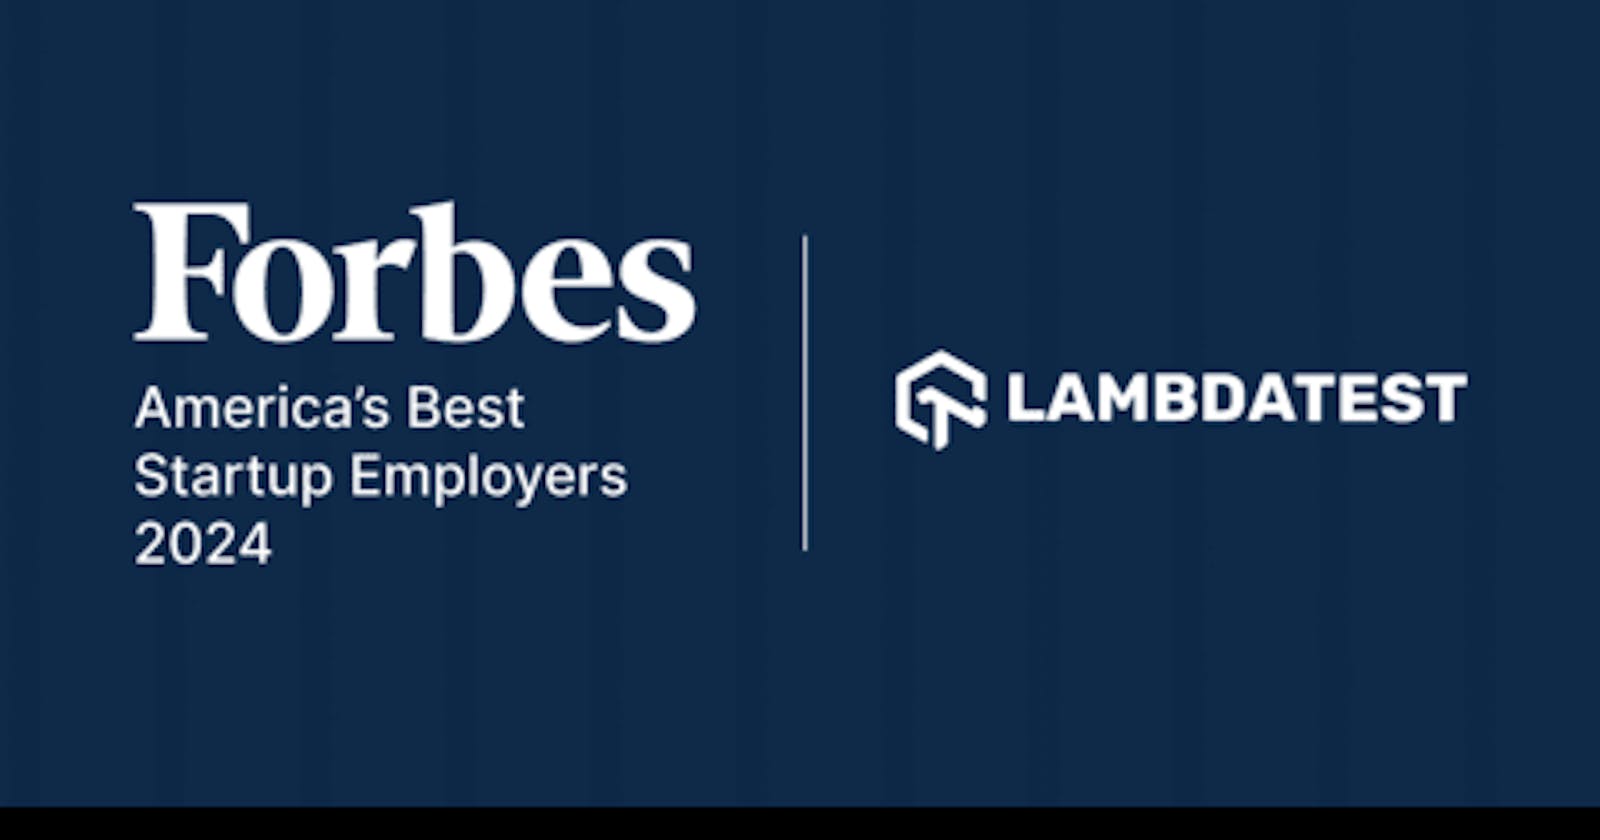 LambdaTest has been named one of America’s Best Startup Employers for 2024 by Forbes